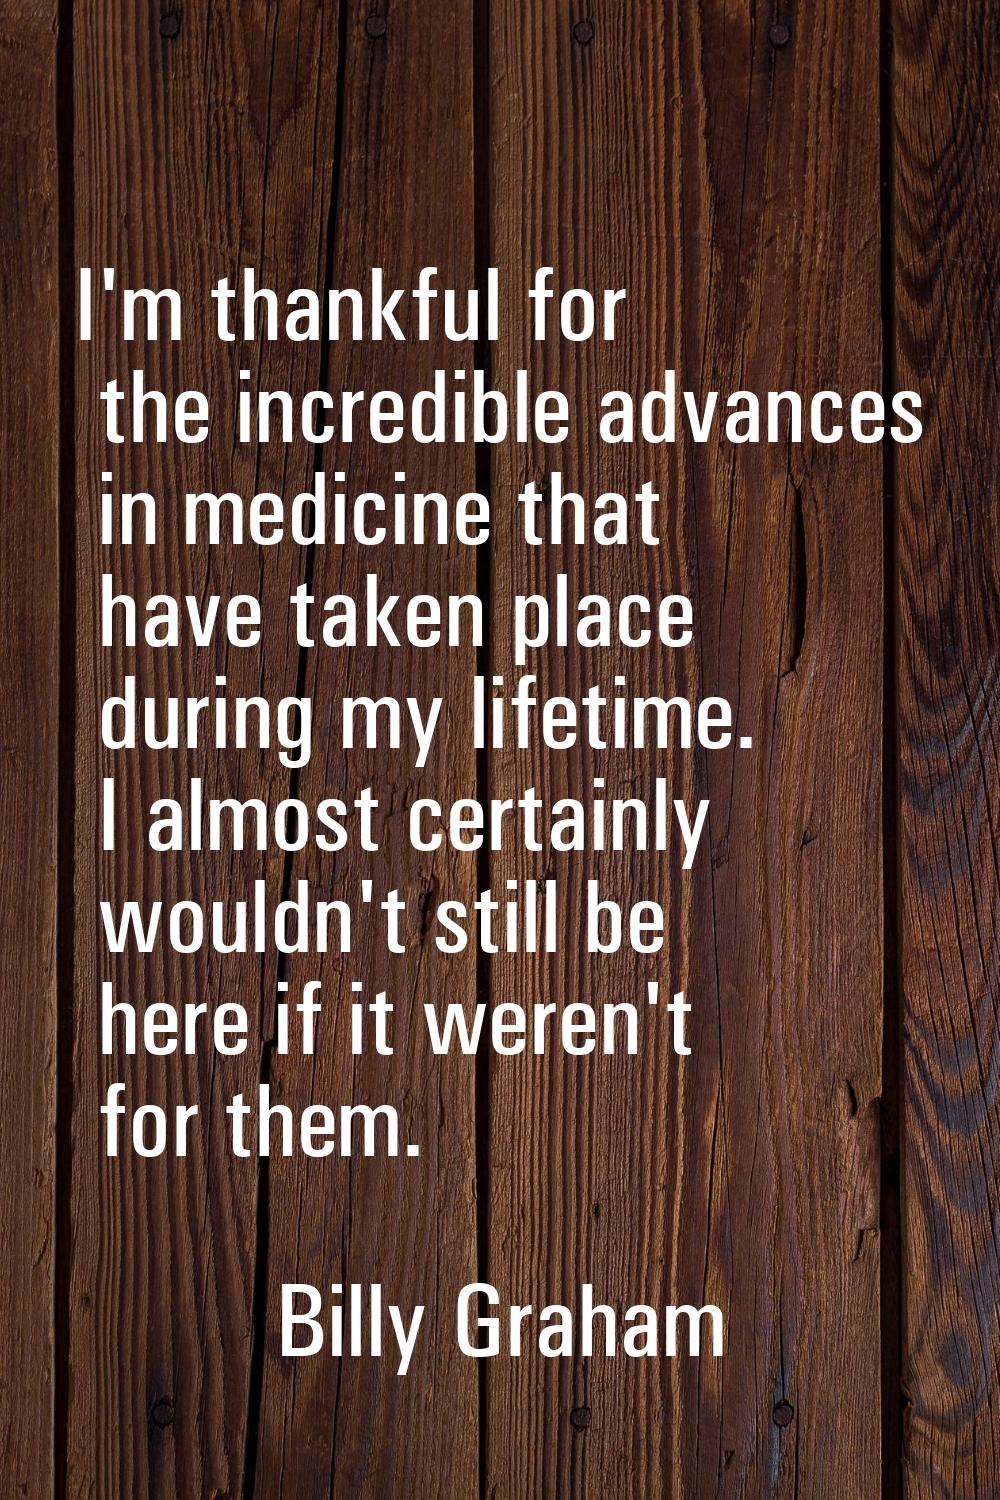 I'm thankful for the incredible advances in medicine that have taken place during my lifetime. I al